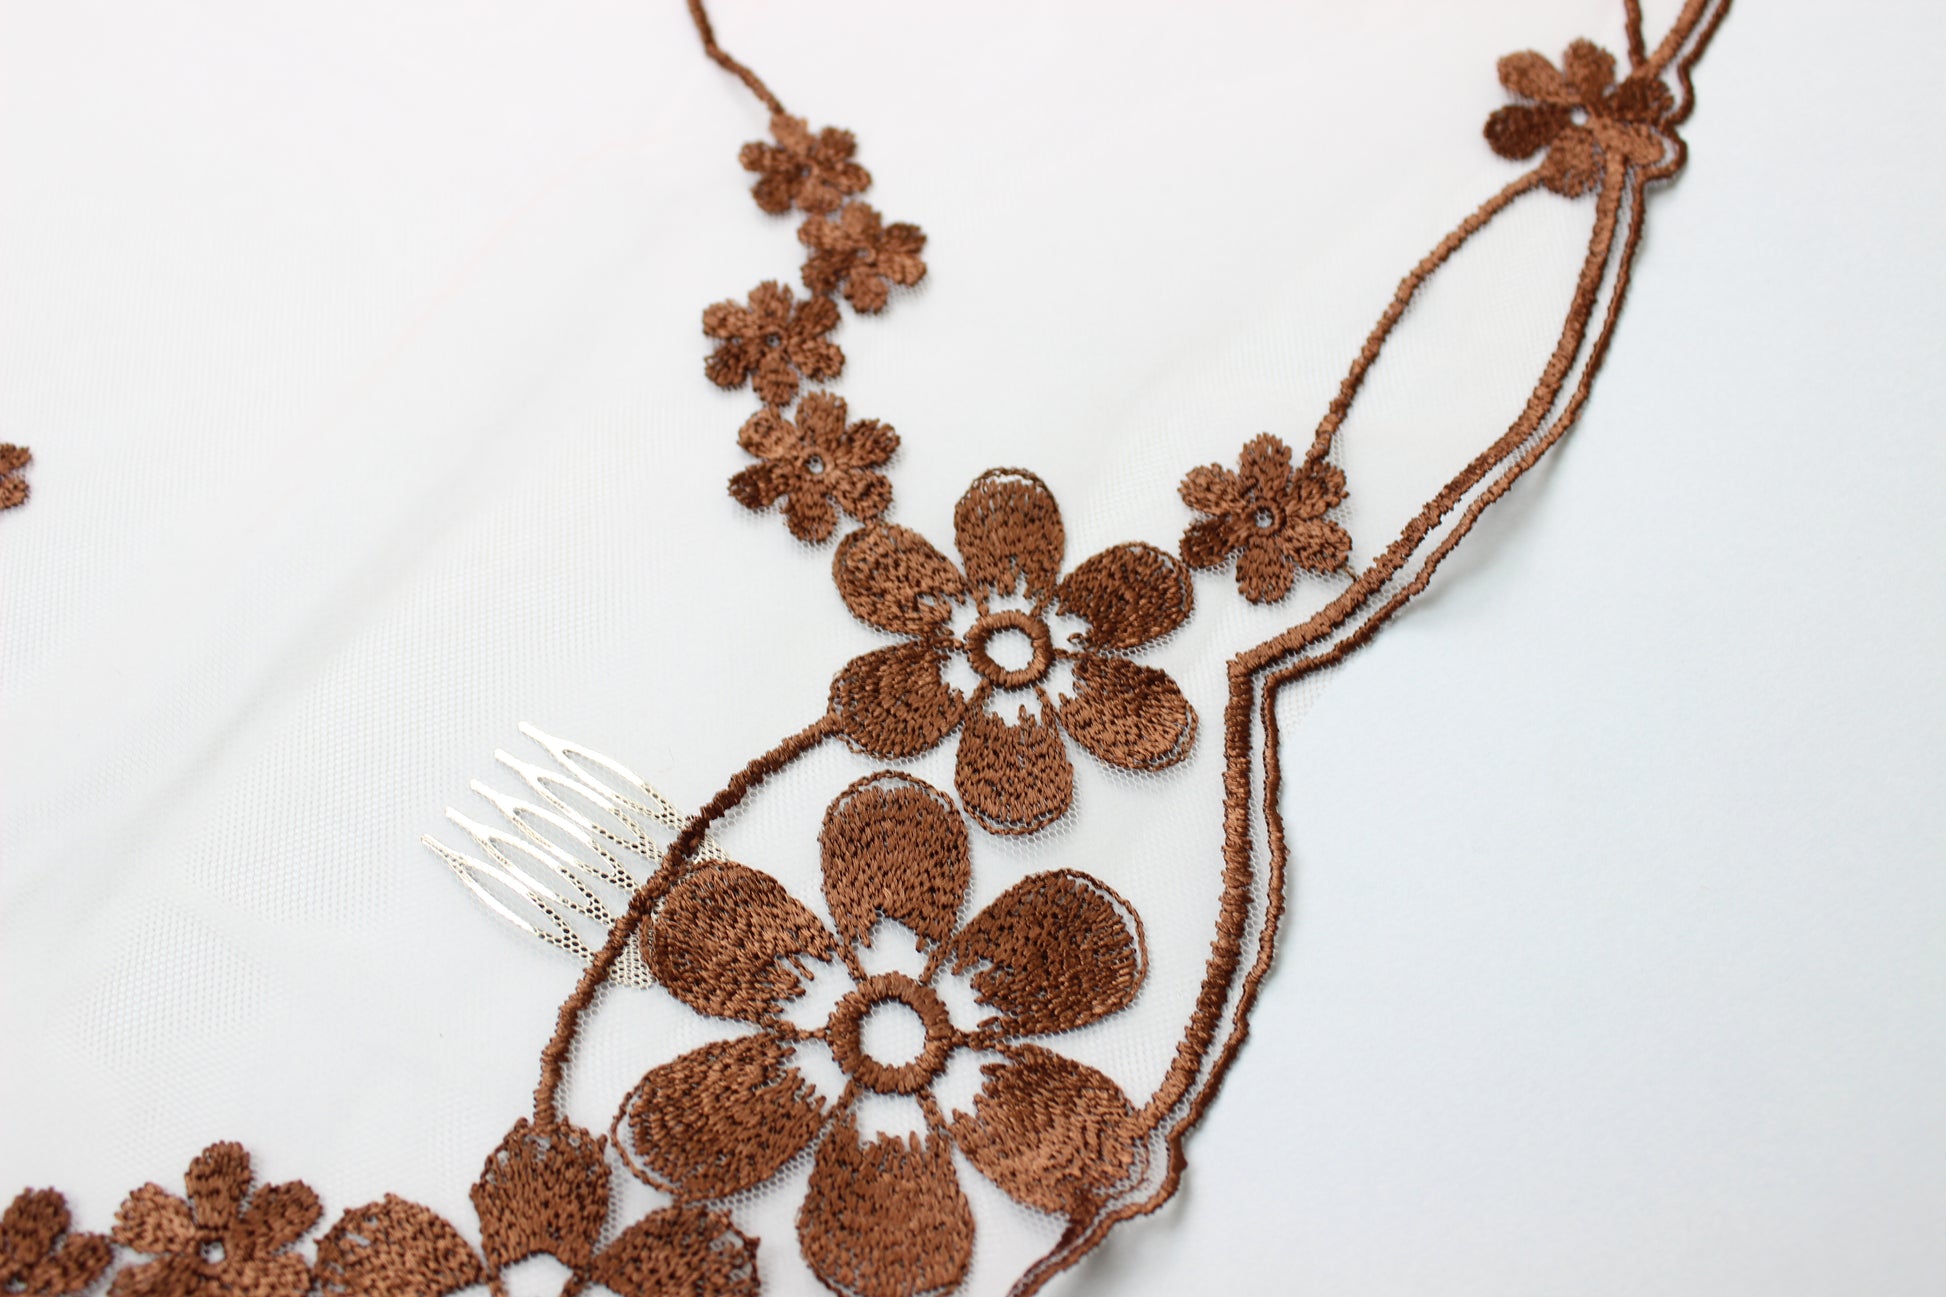 NEW COLOR Bestseller! Brown lace veil - MariaVeils